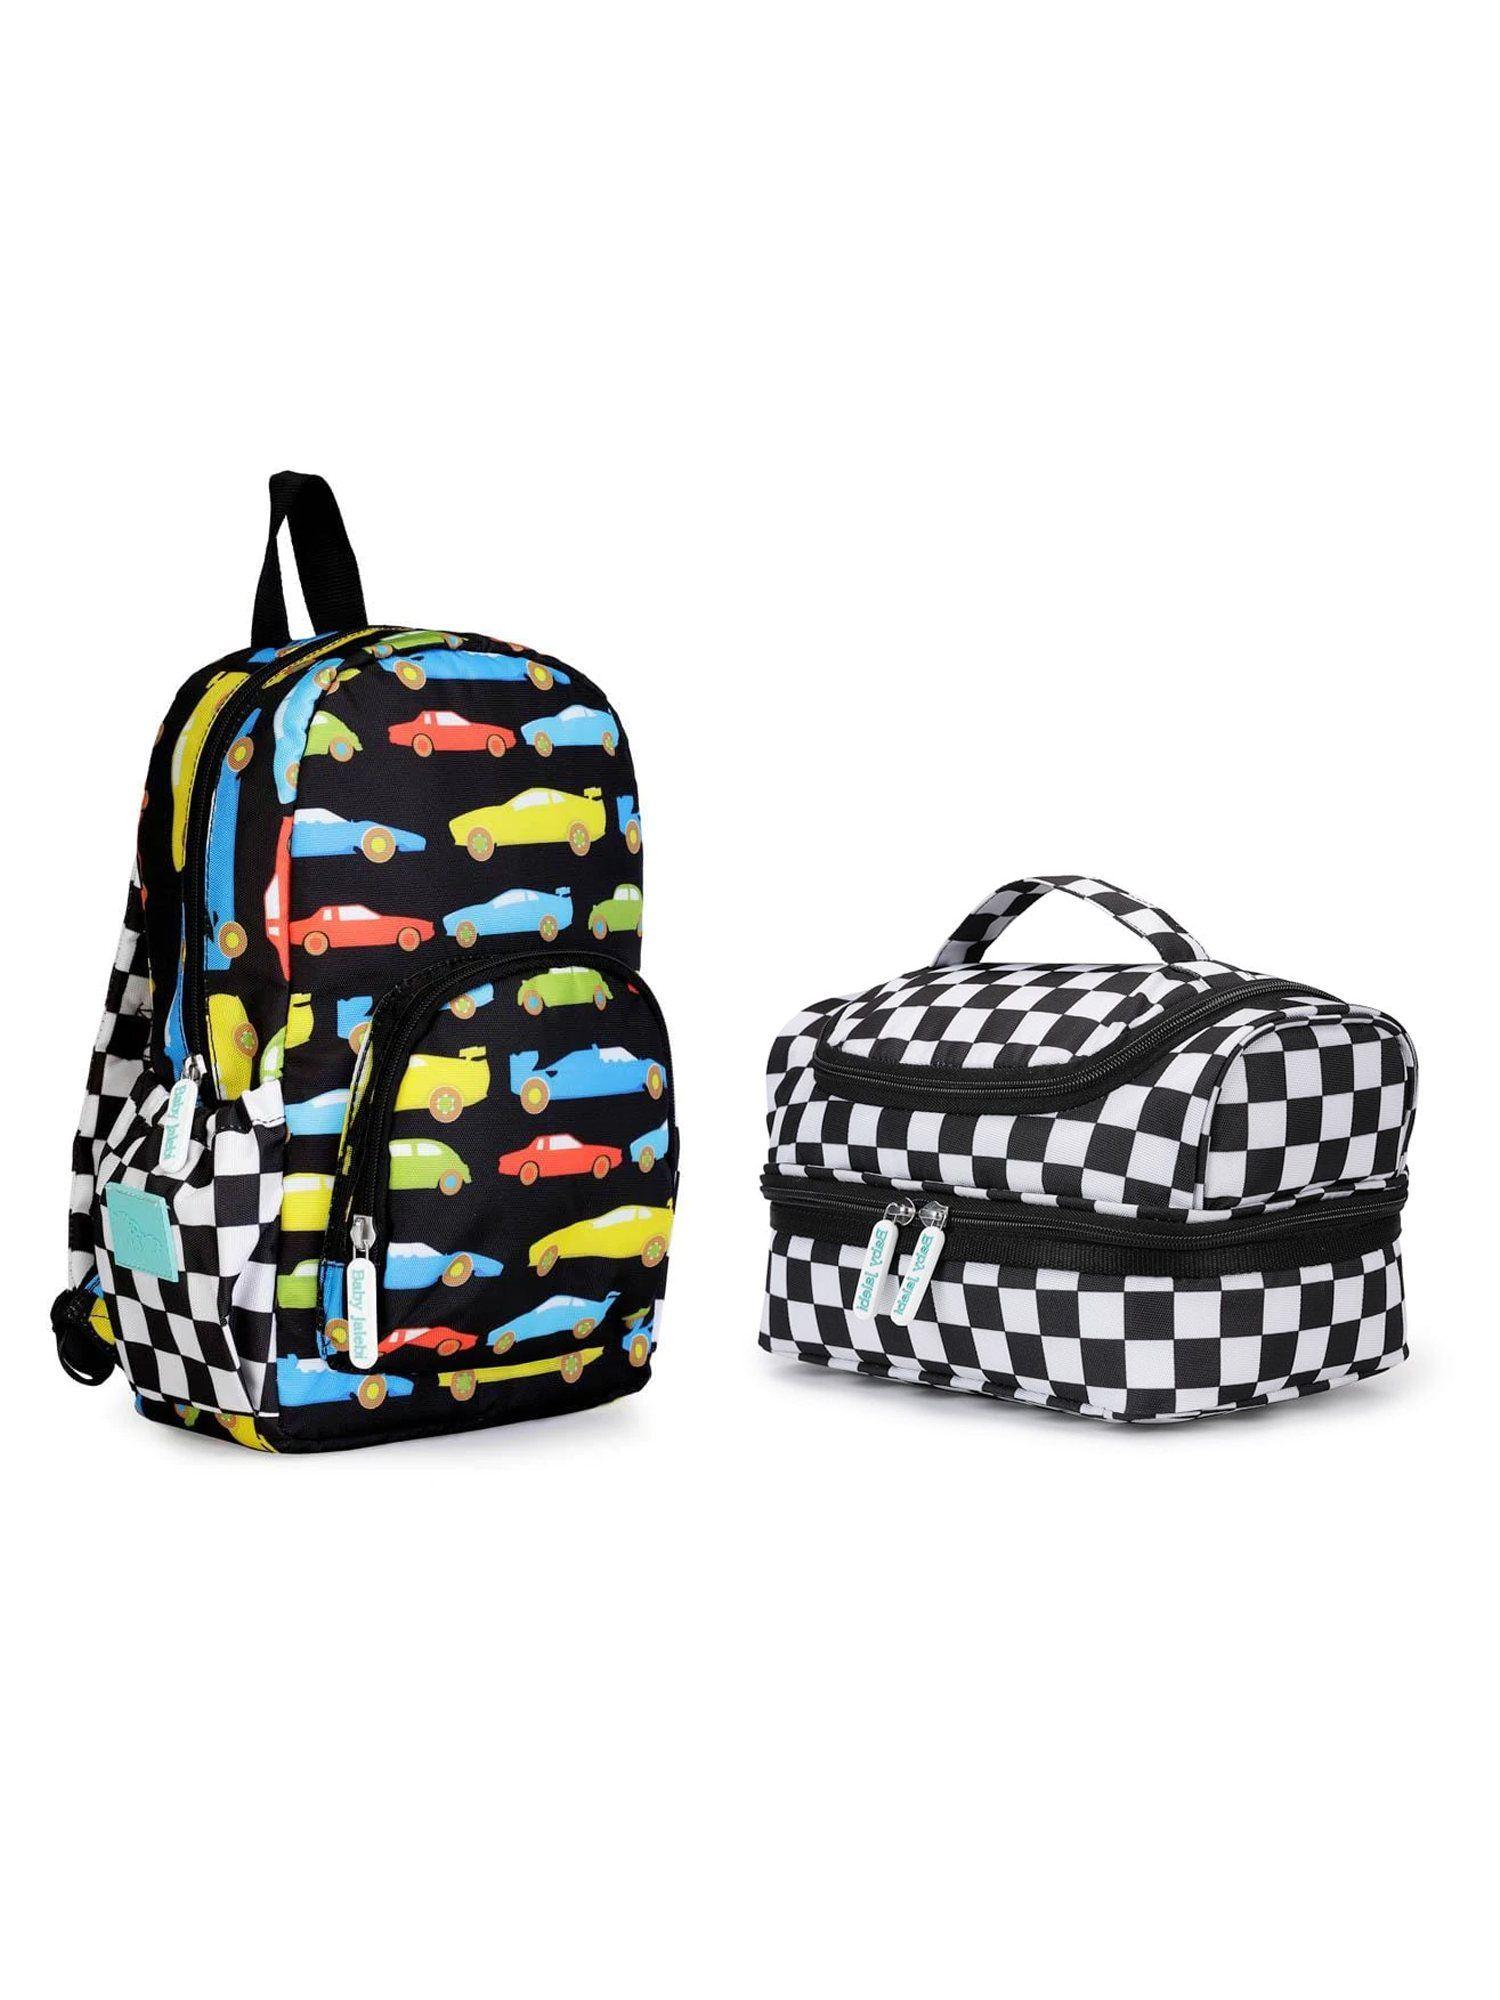 Speed Racer 11 inch Mini Backpack & Lunch Bag